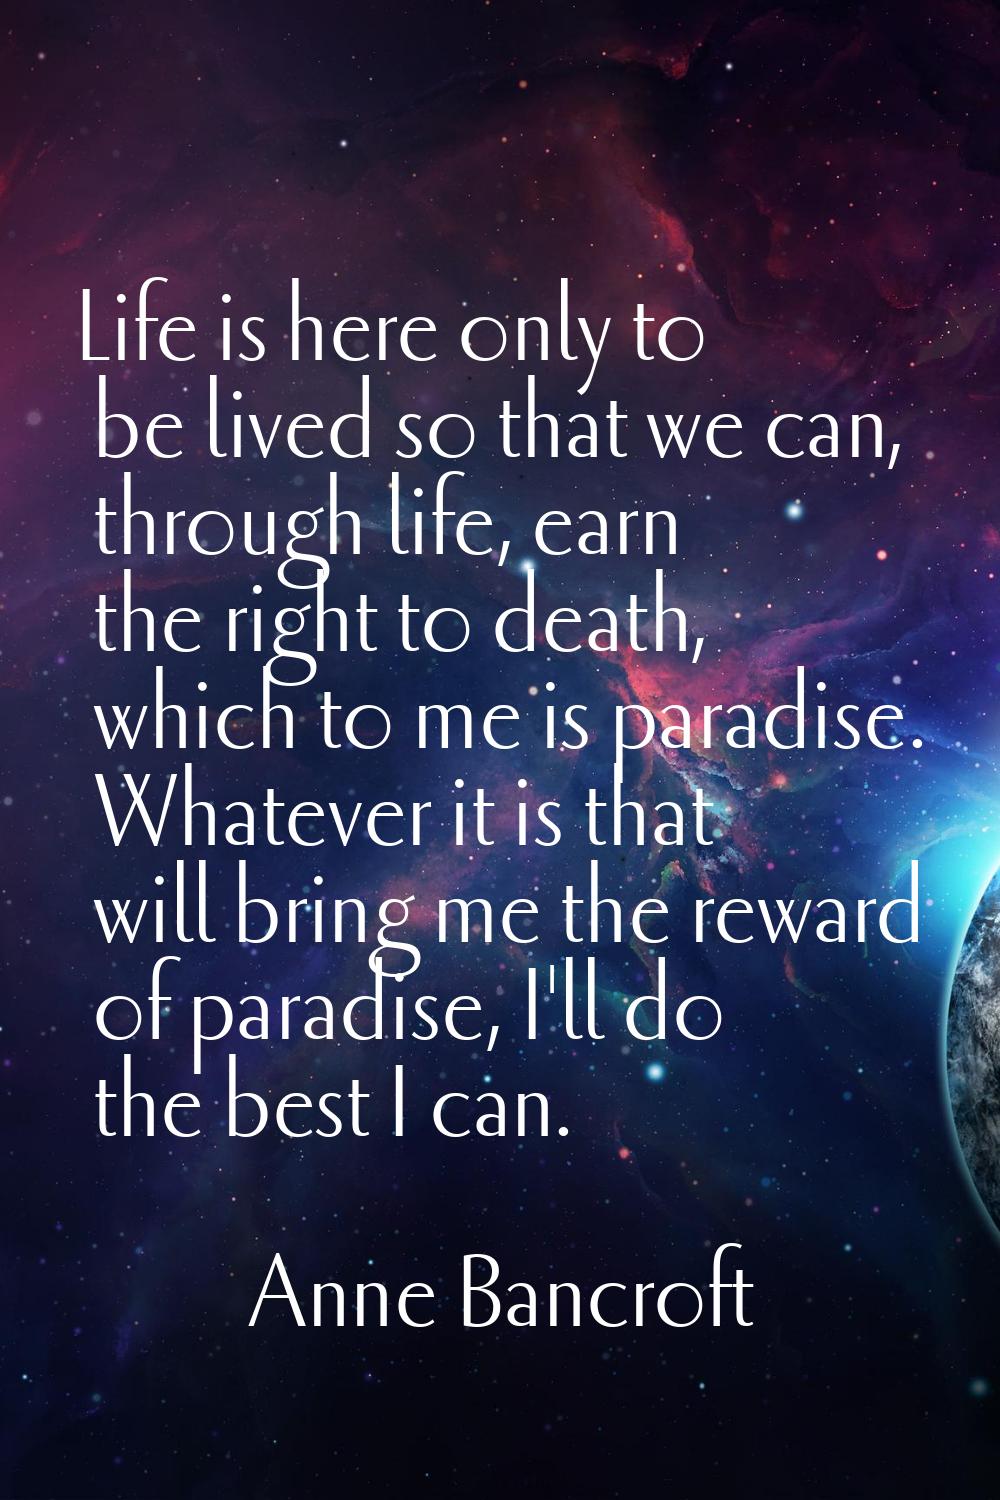 Life is here only to be lived so that we can, through life, earn the right to death, which to me is